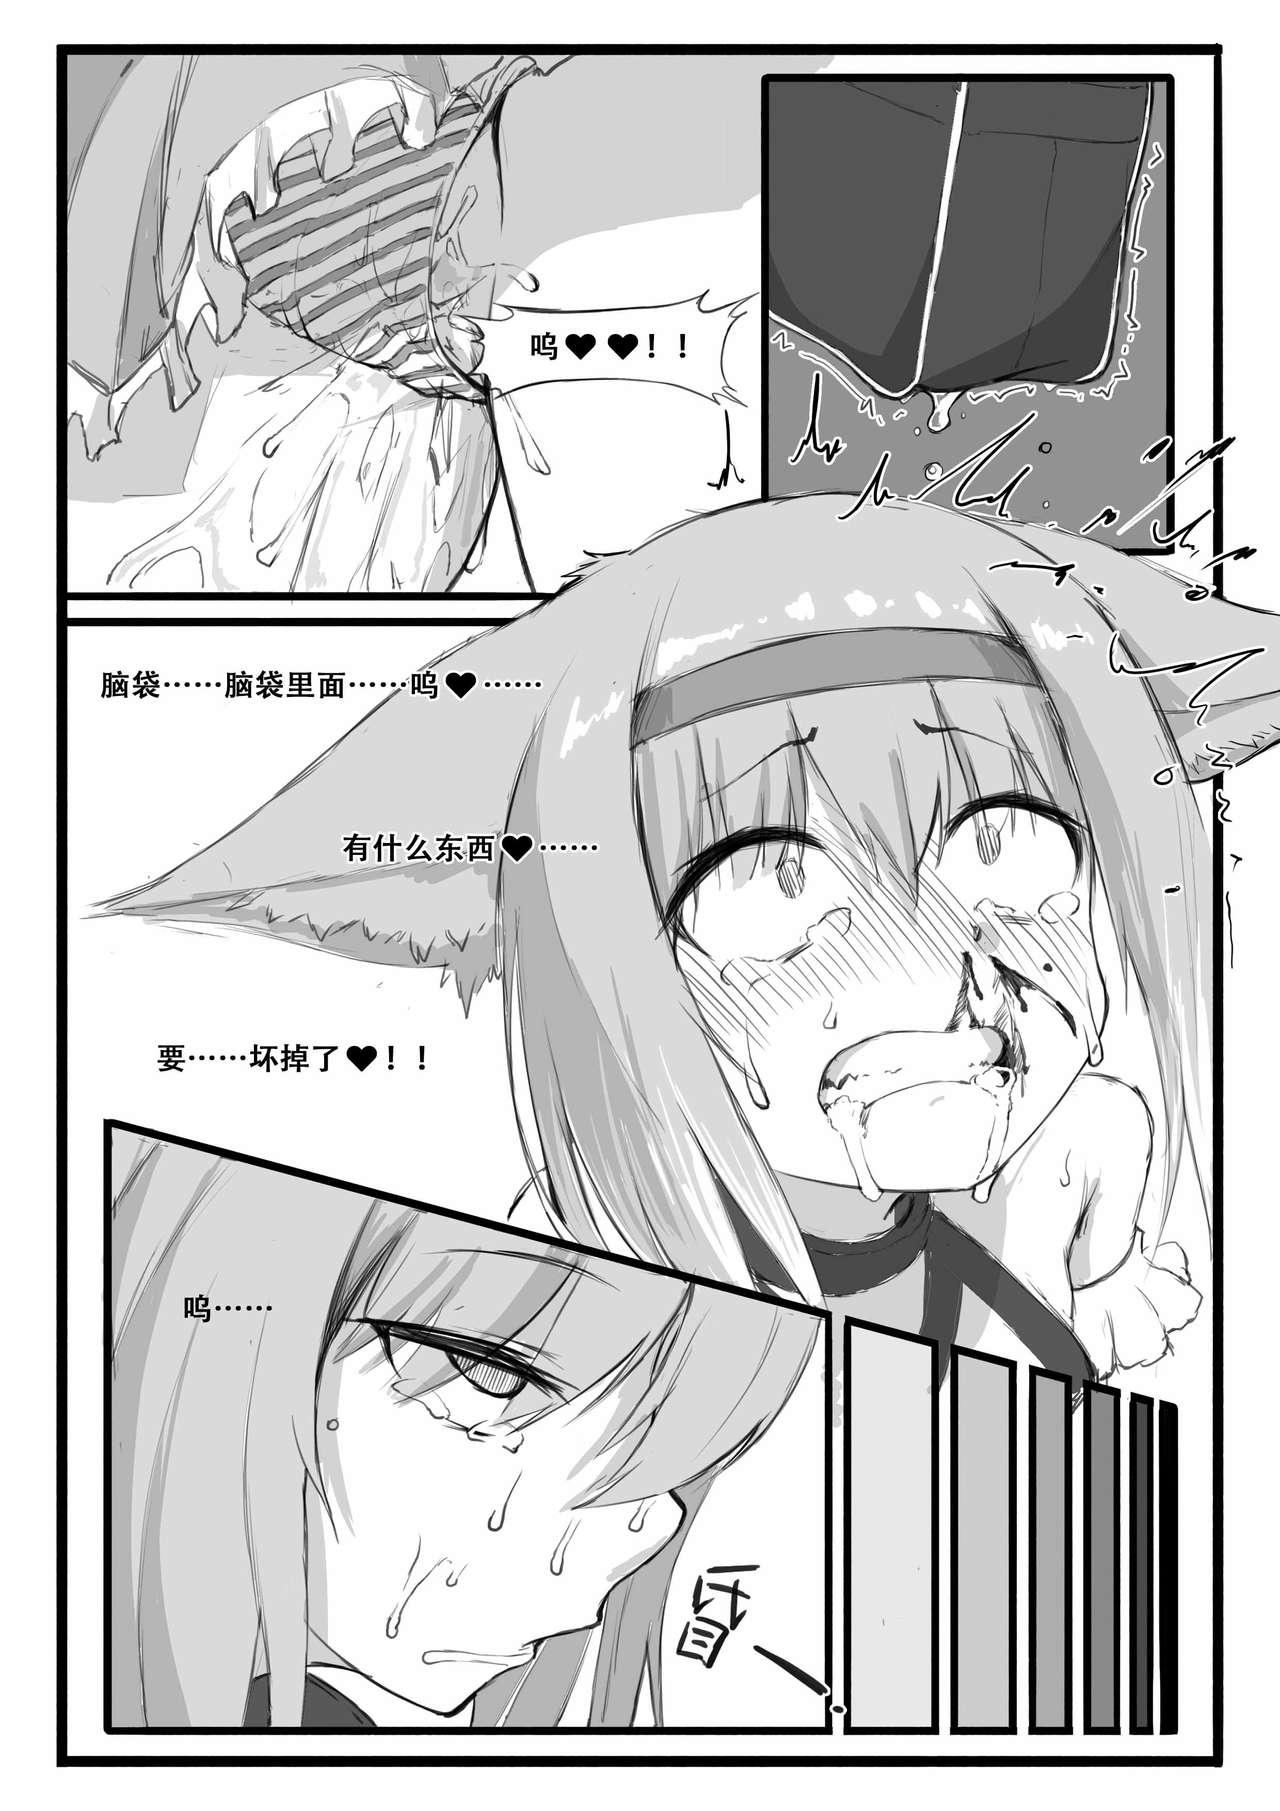 Oral 铃兰的单人任务 - Arknights Butts - Page 12